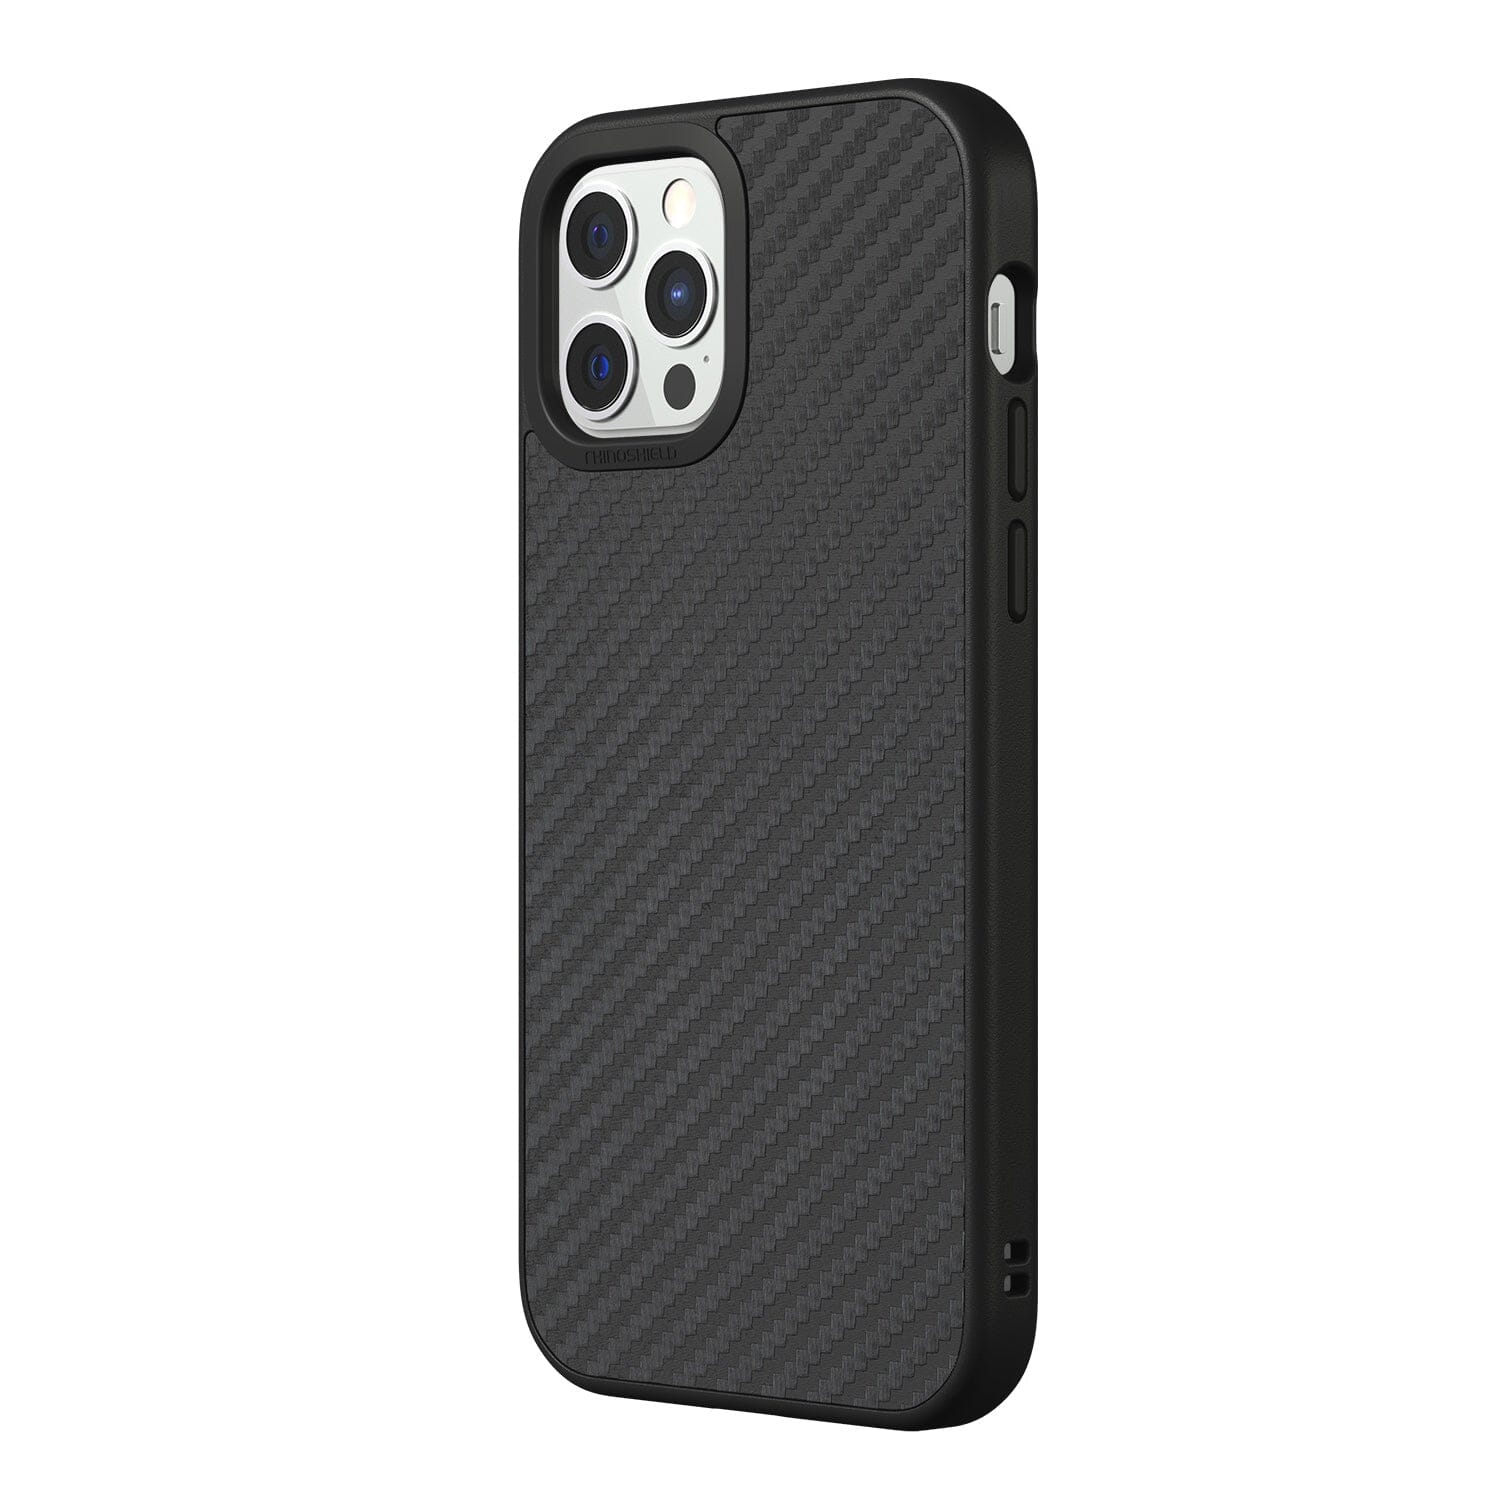 RhinoShield SolidSuit Protective Case with Premium Finish for iPhone 12 Series (2020) iPhone 12 Series RhinoShield iPhone 12 Pro Max 6.7" Carbon Fiber 